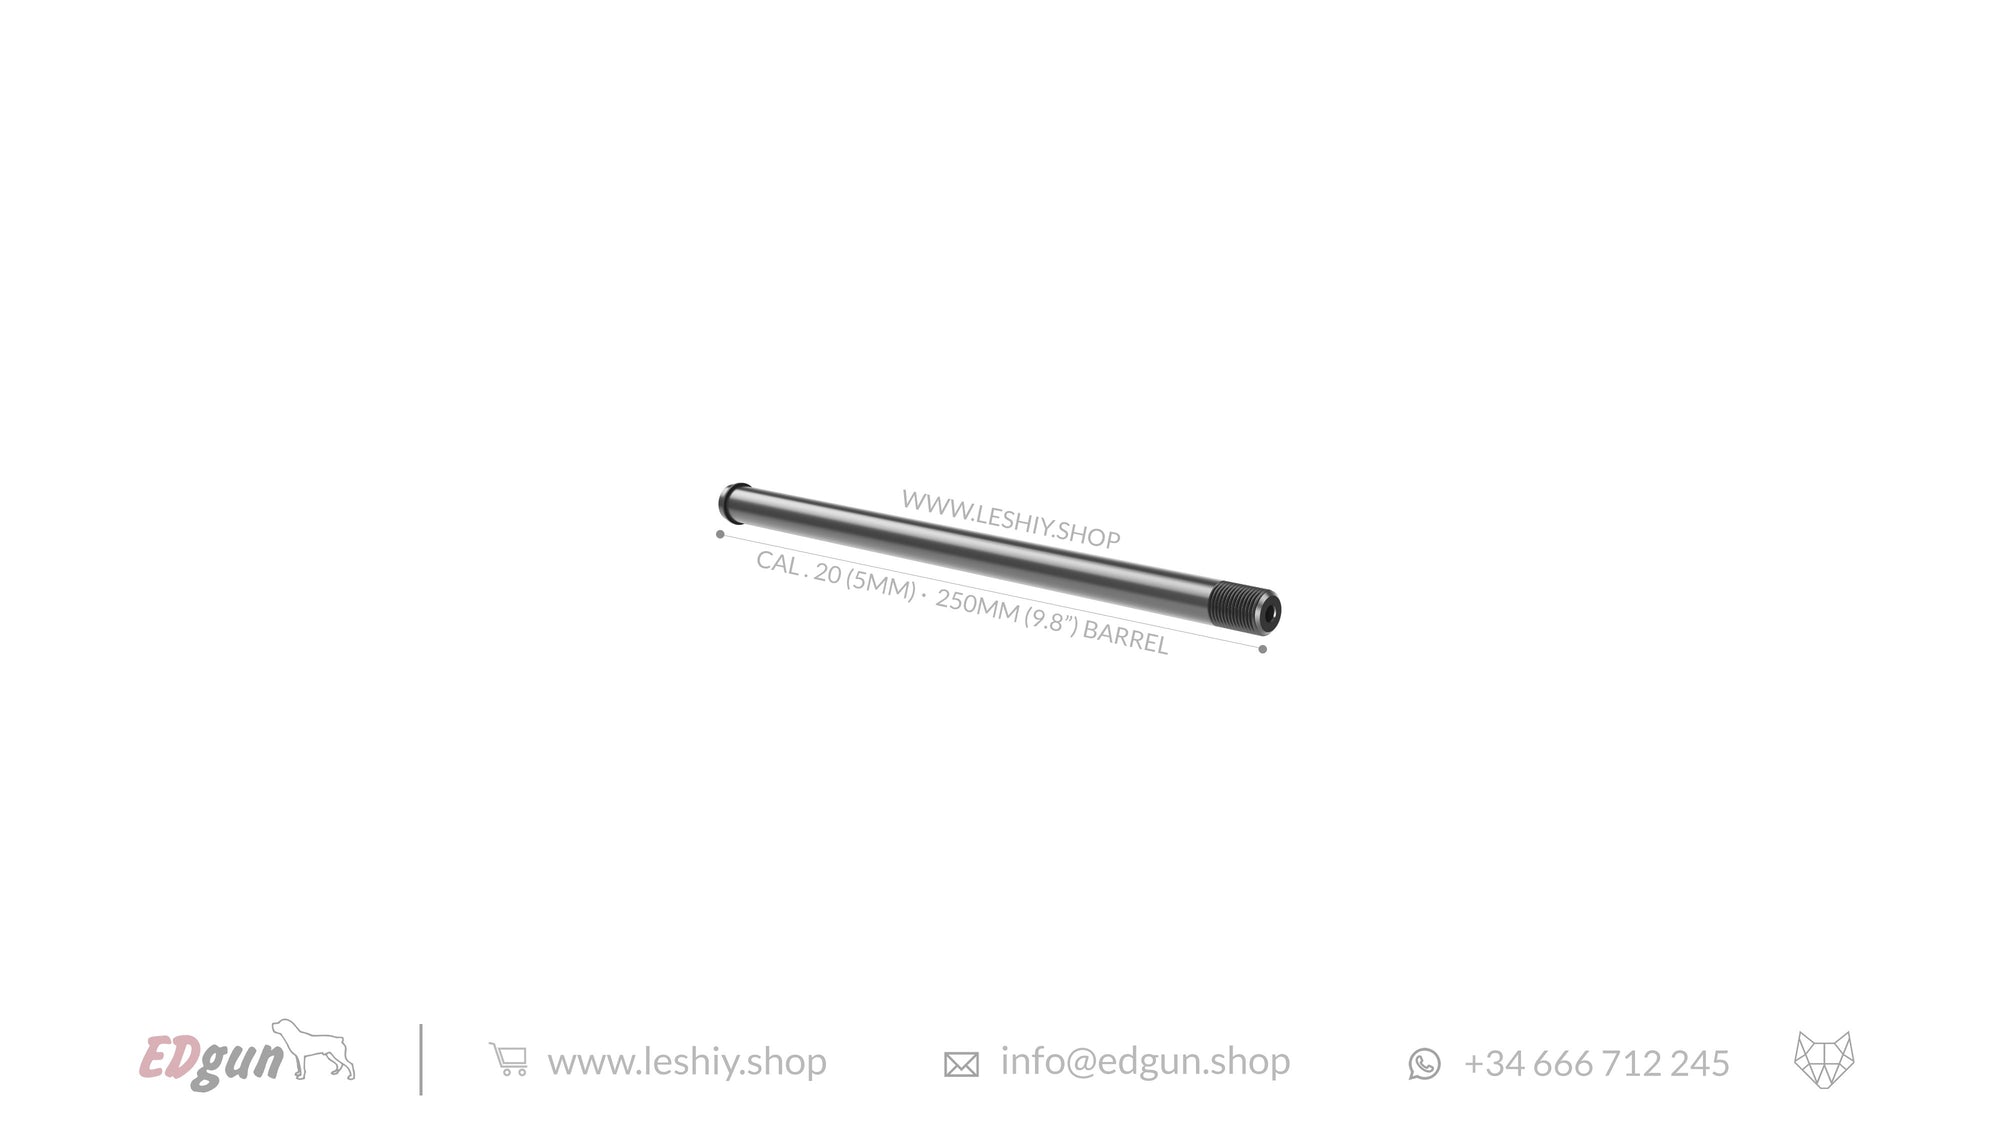 Barrels Lothar Walther cal.20 (5mm) - 250mm (9.8¨) for Leshiy 2